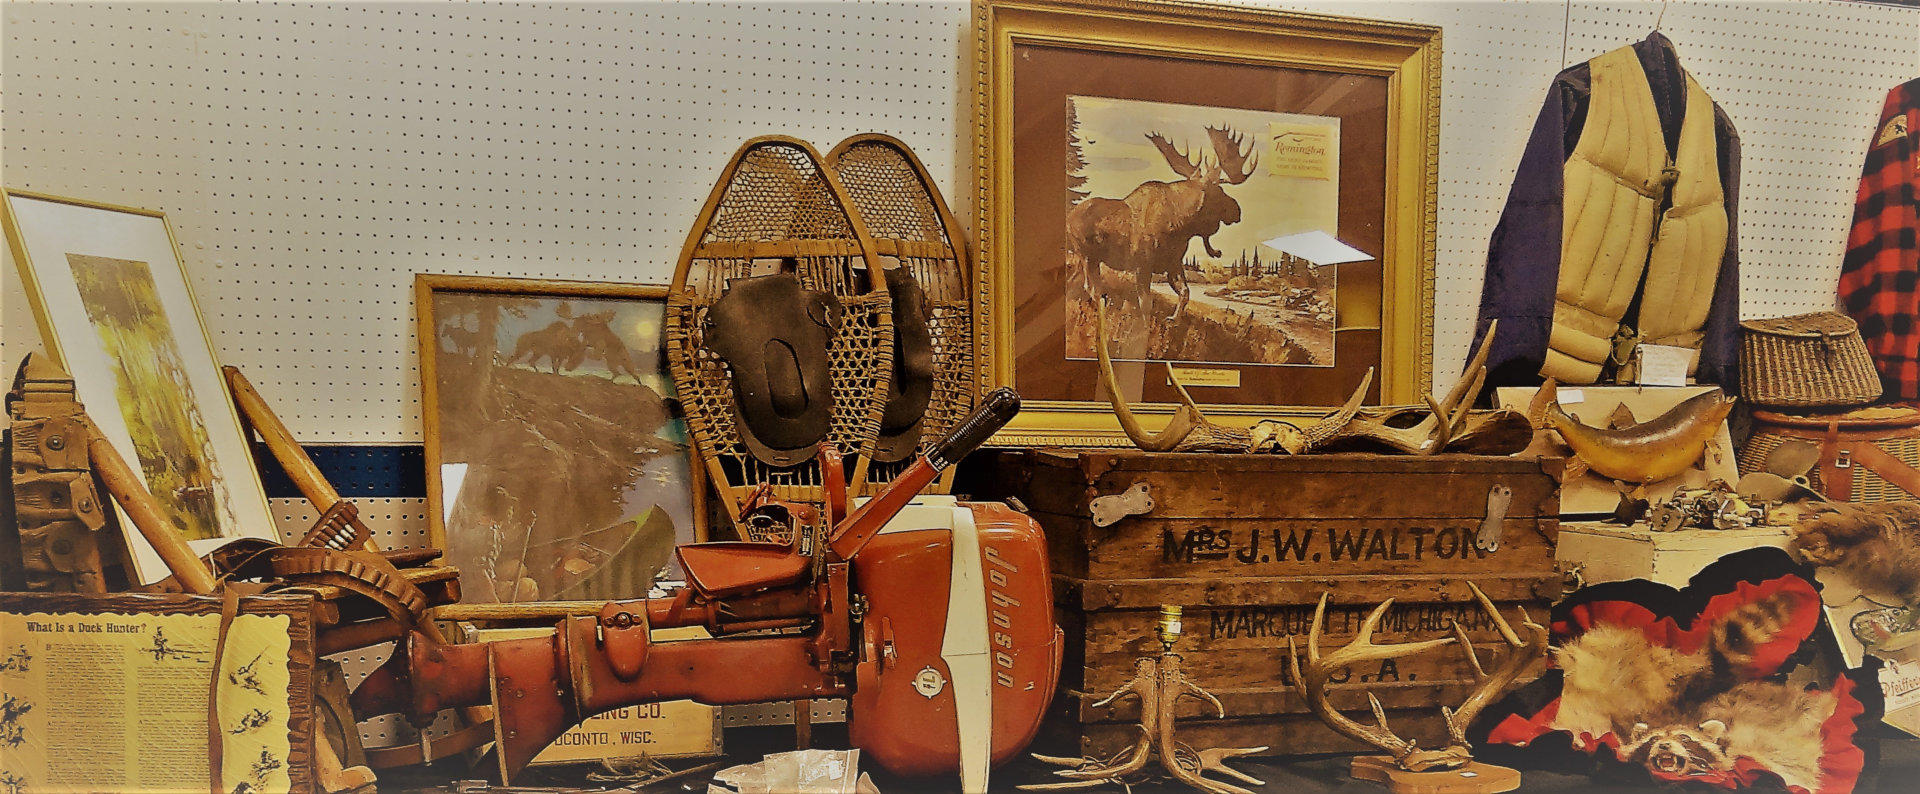 Antiques Sporting Advertising & Collectibles Show in Oshkosh, Wisconsin